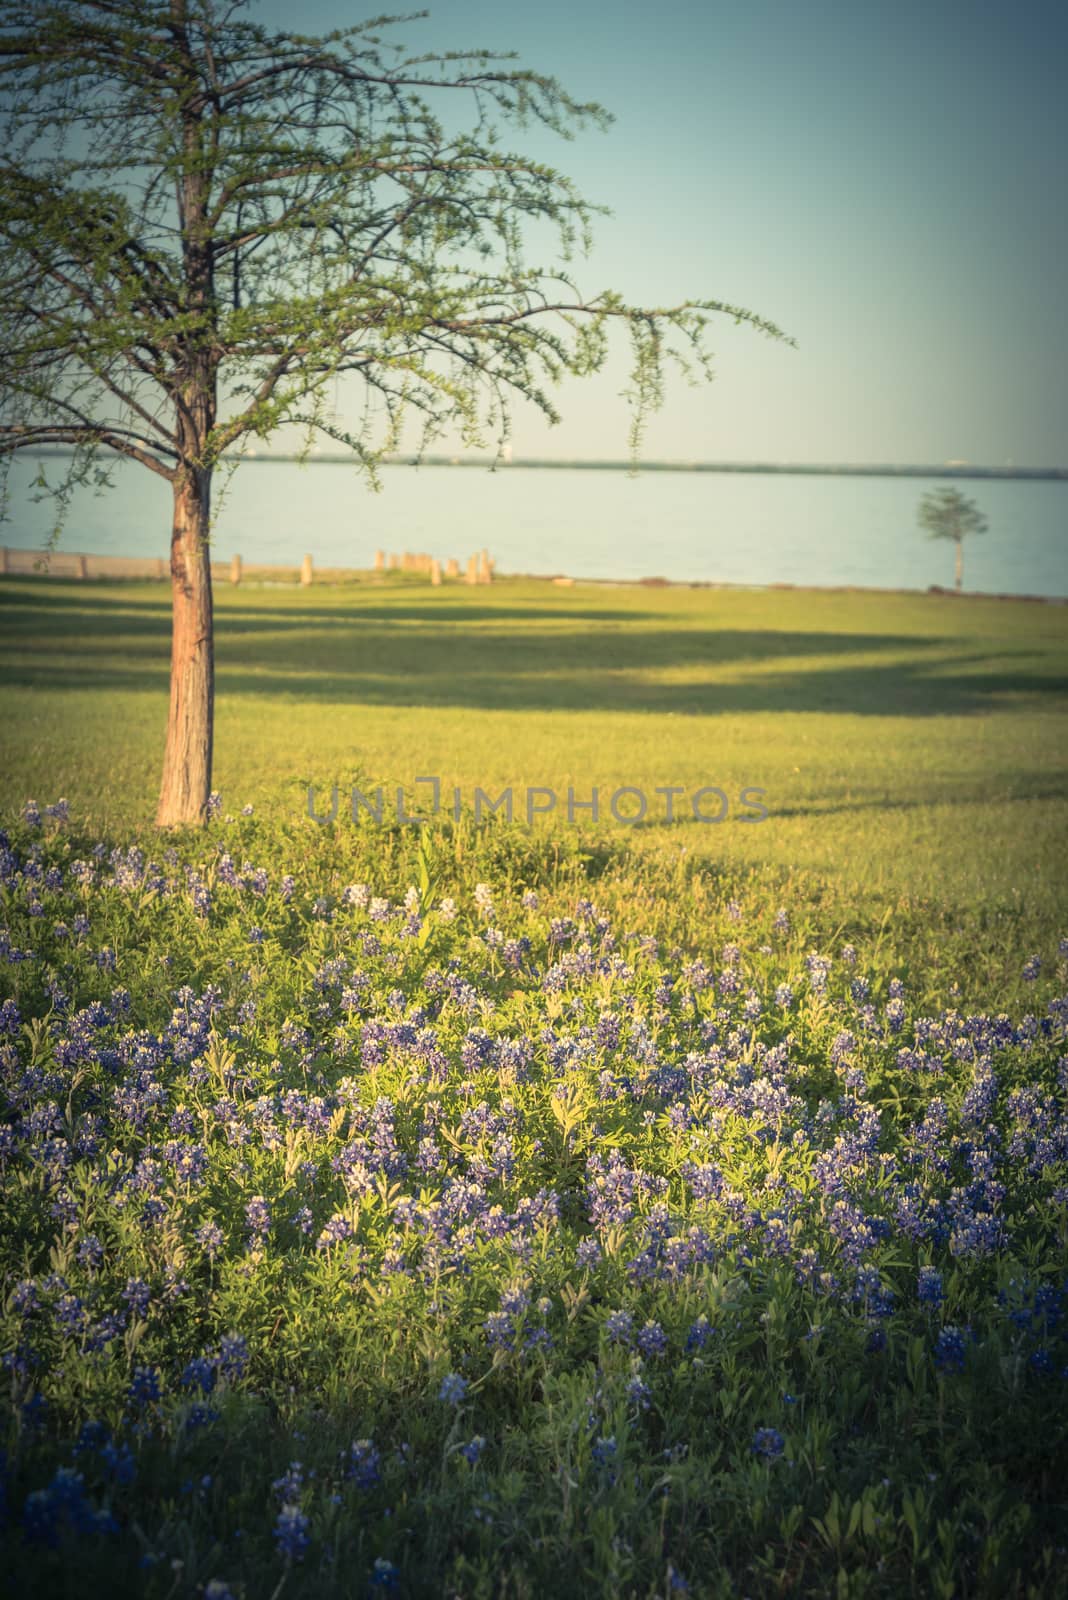 Filtered image of Texas state flower Bluebonnet blooming near the lake in springtime by trongnguyen